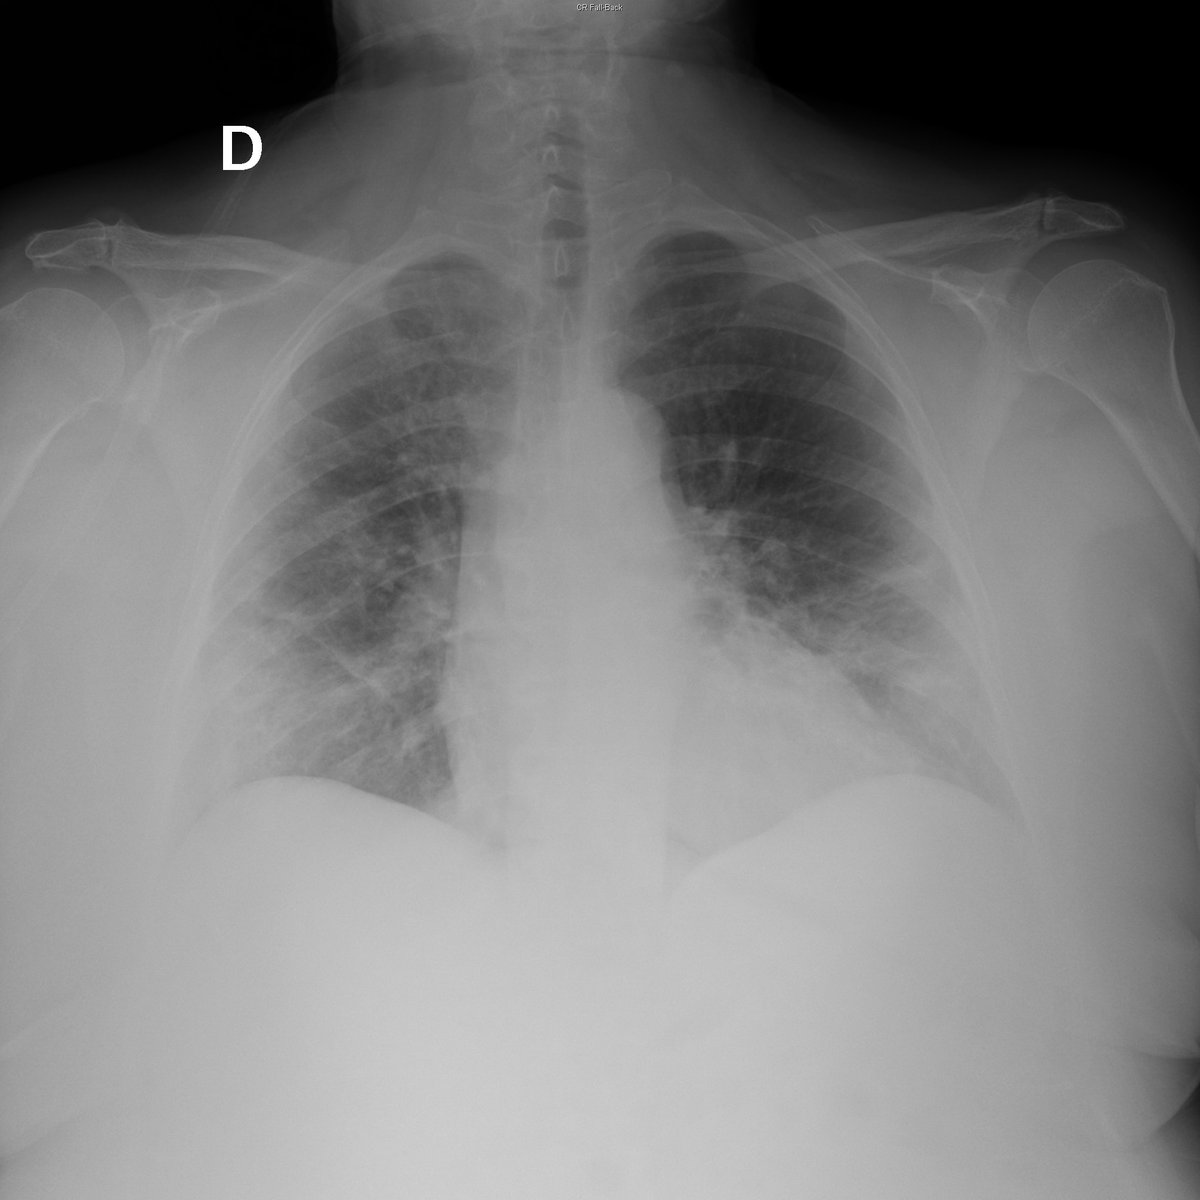 Case 25. 63yo female. Cough and fever. Day 1 and 4.